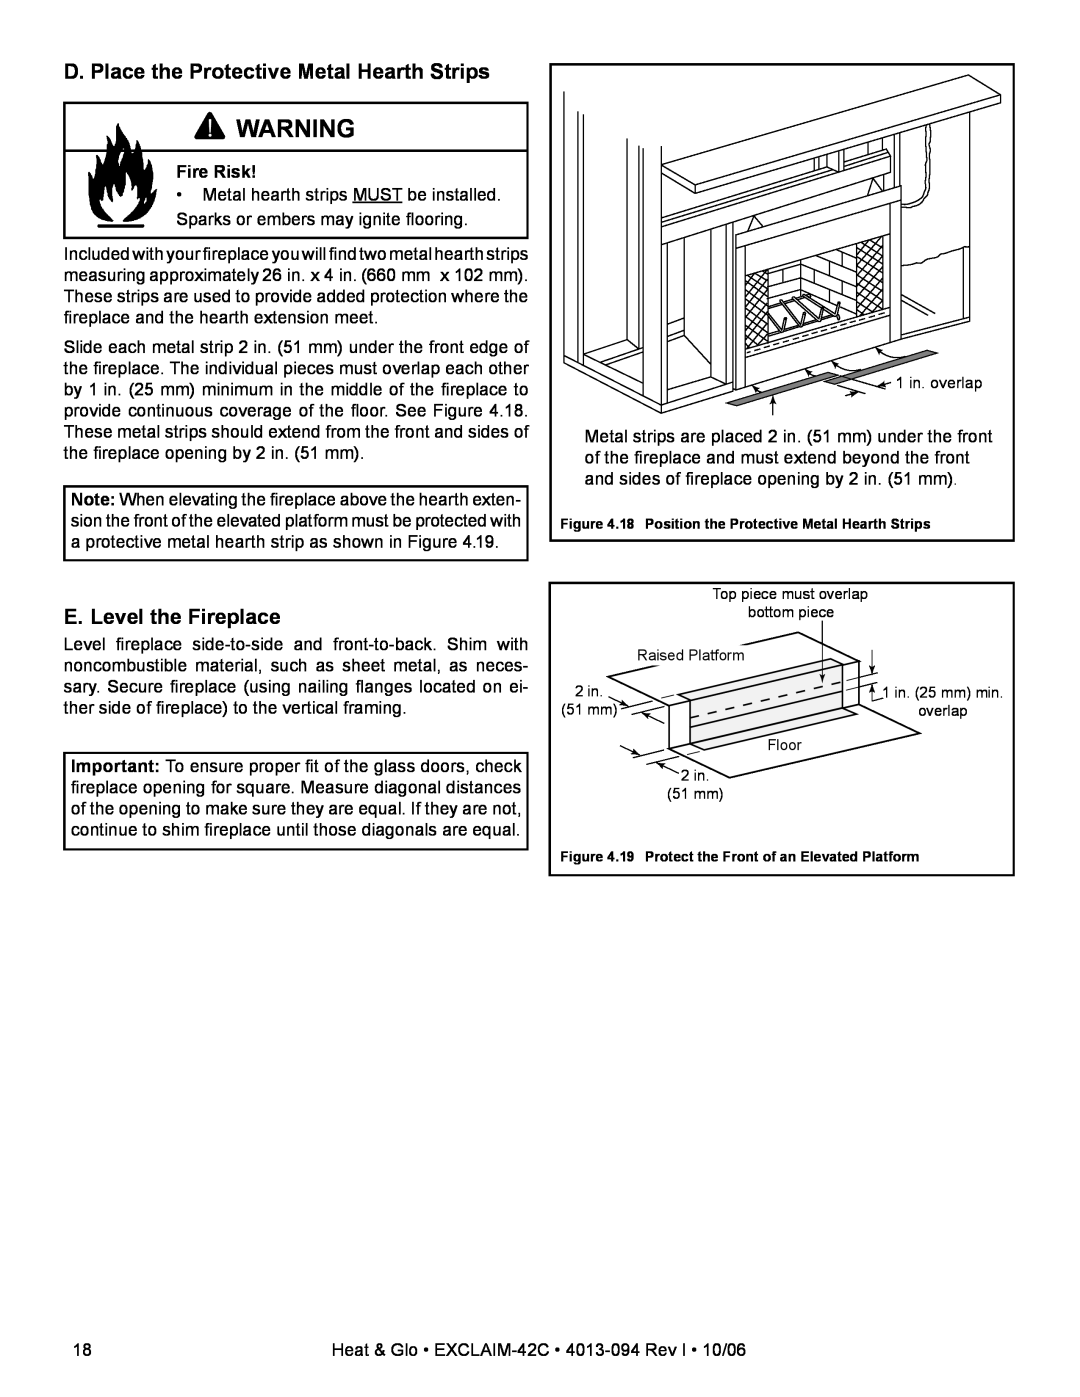 Heat & Glo LifeStyle EXCLAIM-42H-C D. Place the Protective Metal Hearth Strips, E. Level the Fireplace, Fire Risk 